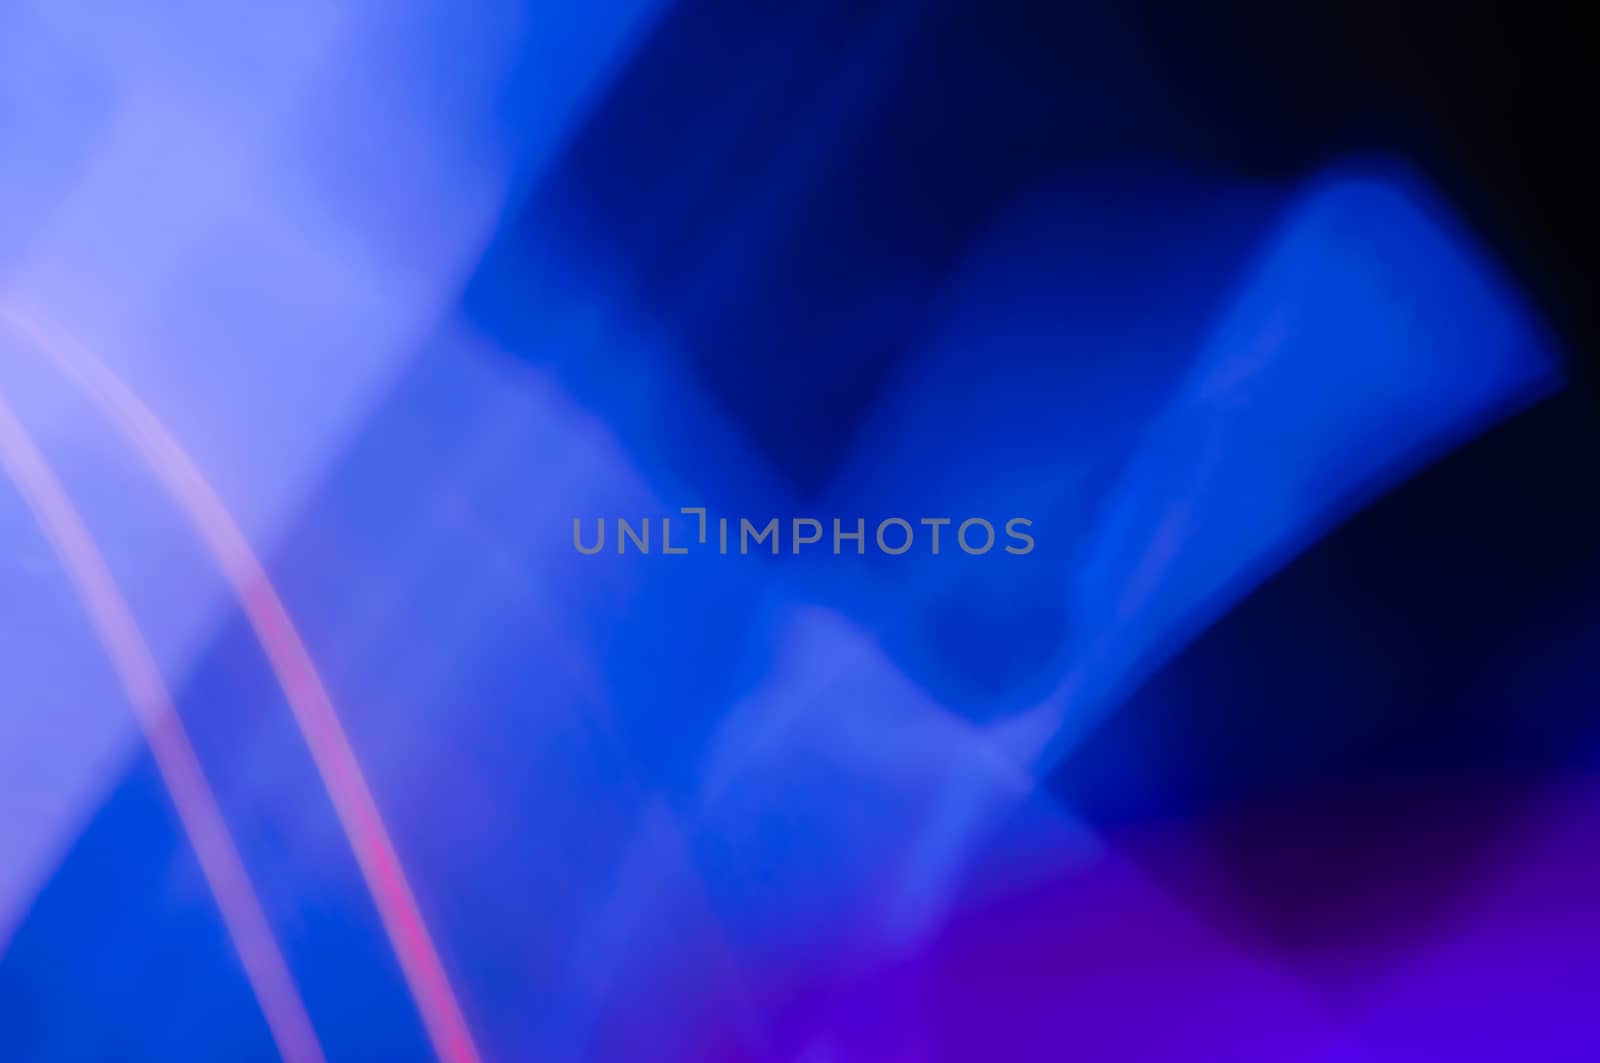 A deep blue and pink photographic abstract background